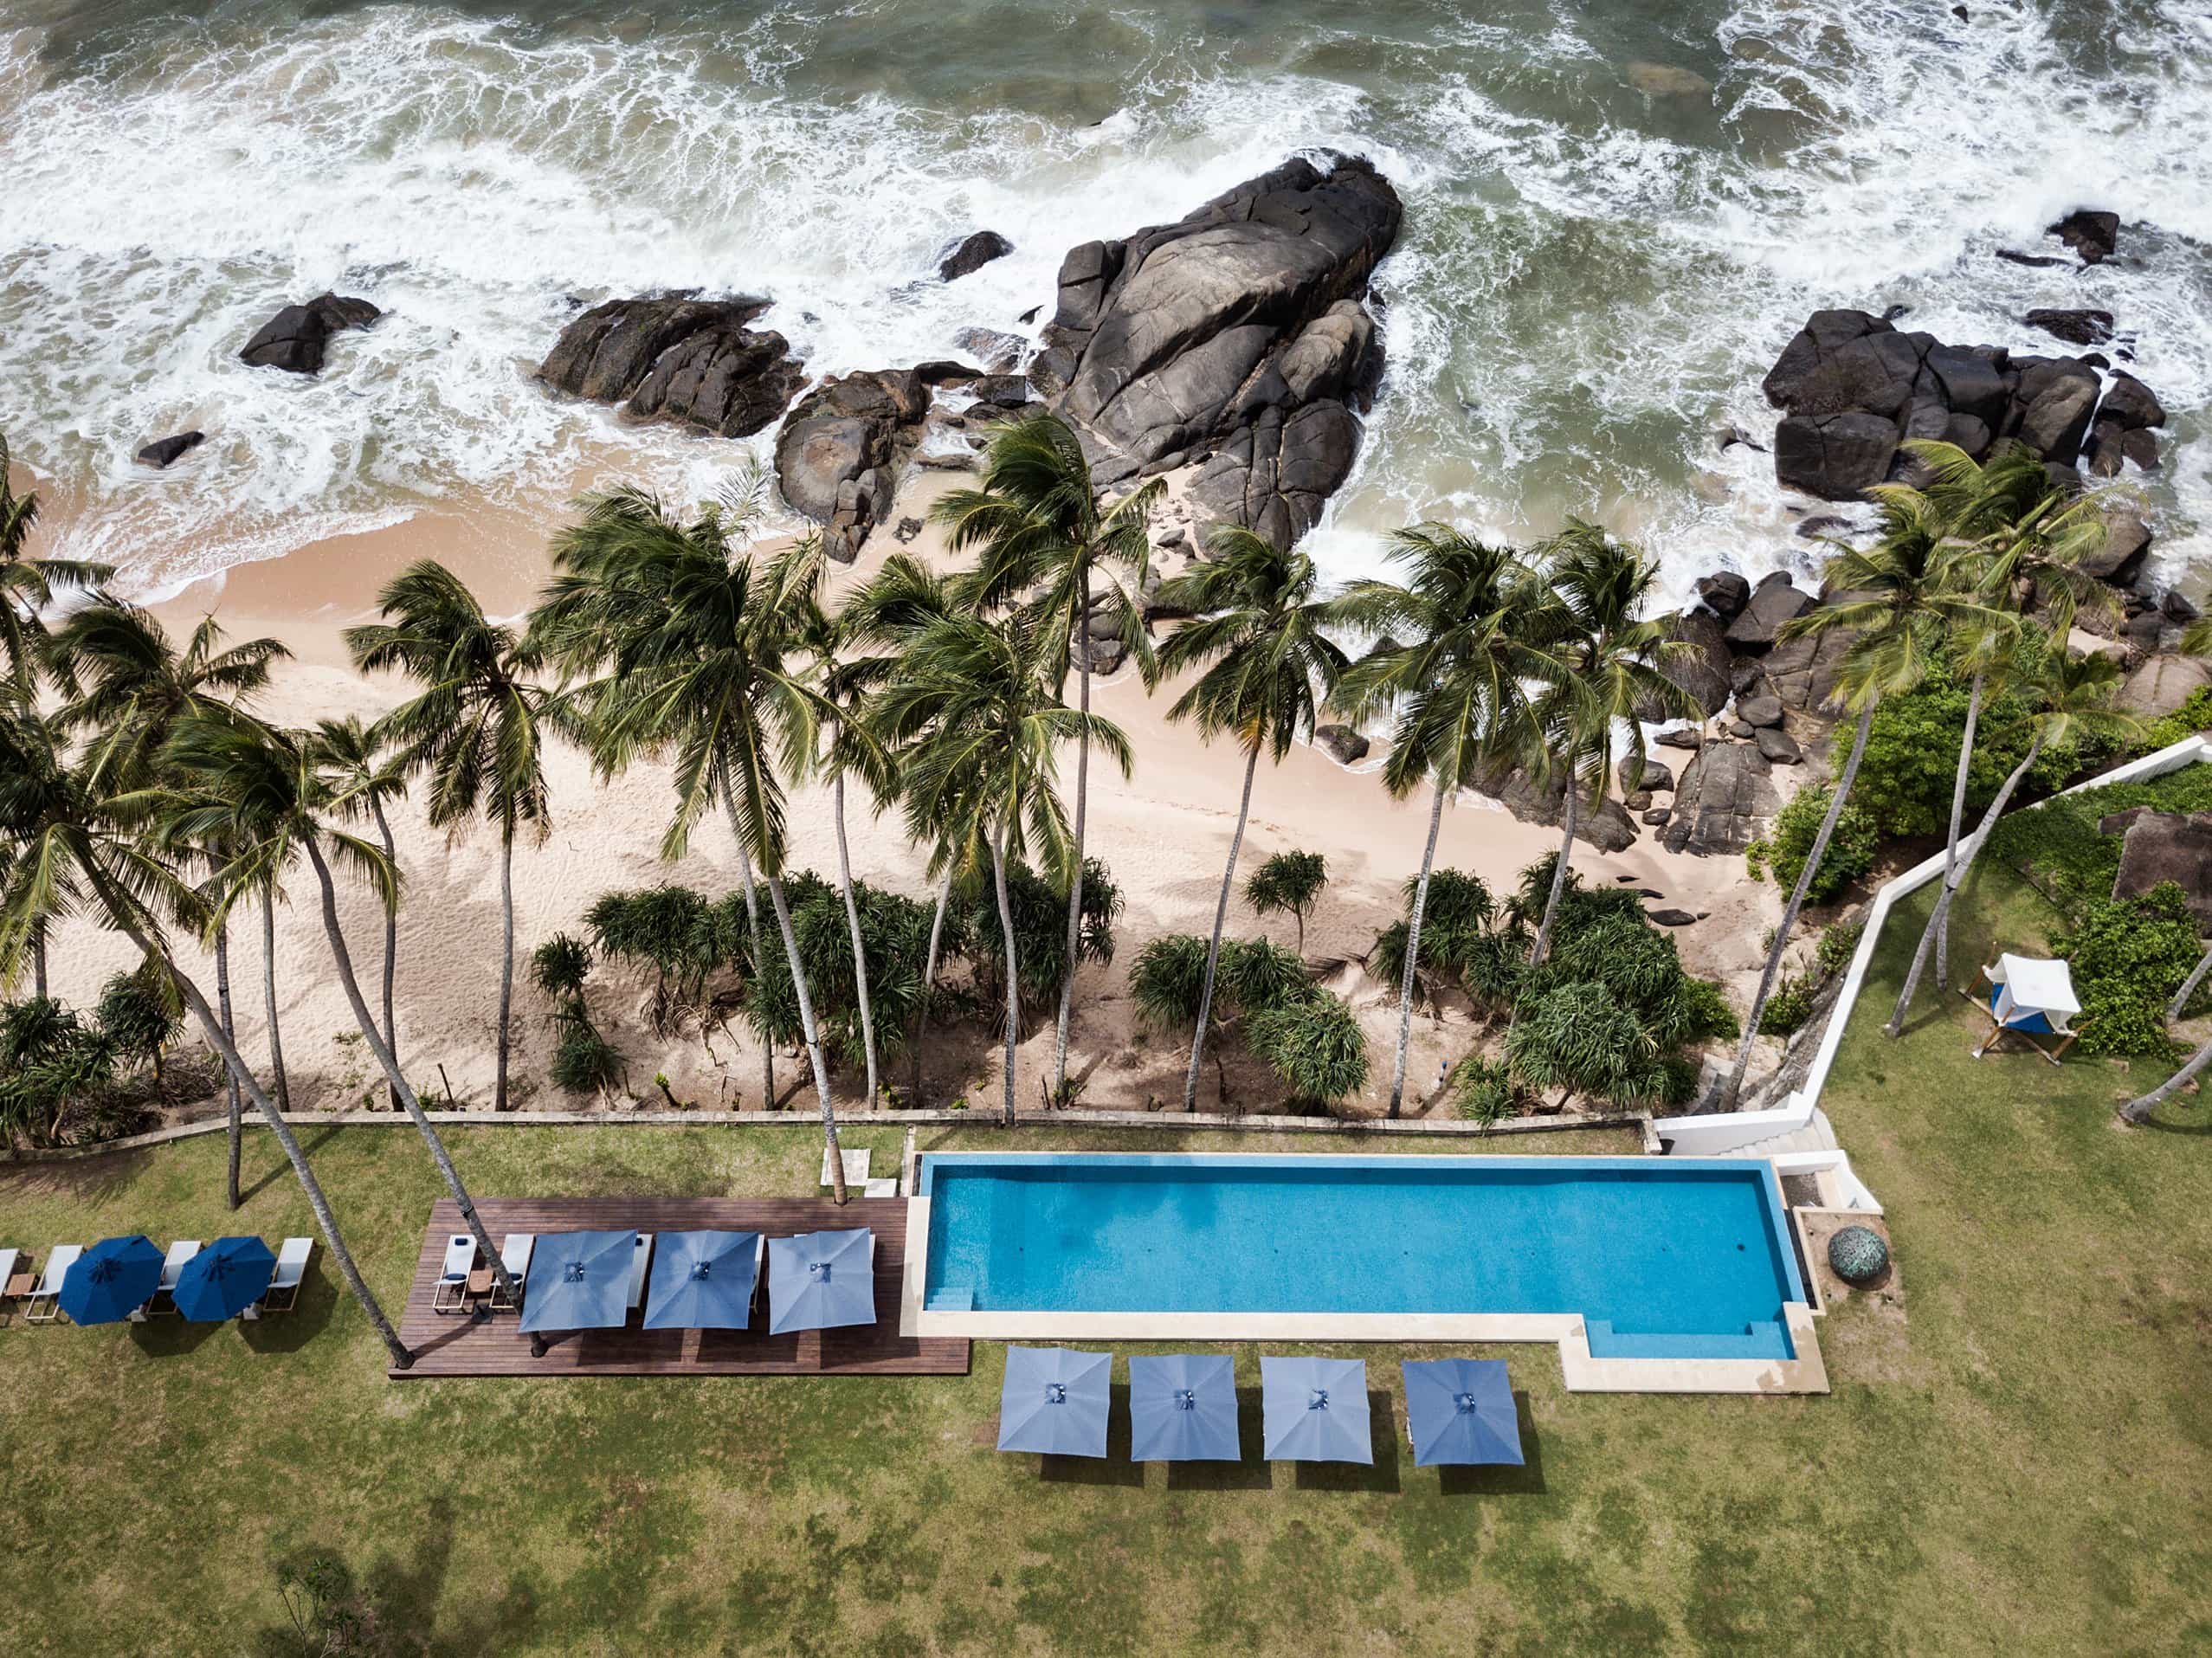 Aerial view of pool and palm trees at Kumu beach in Sri Lanka